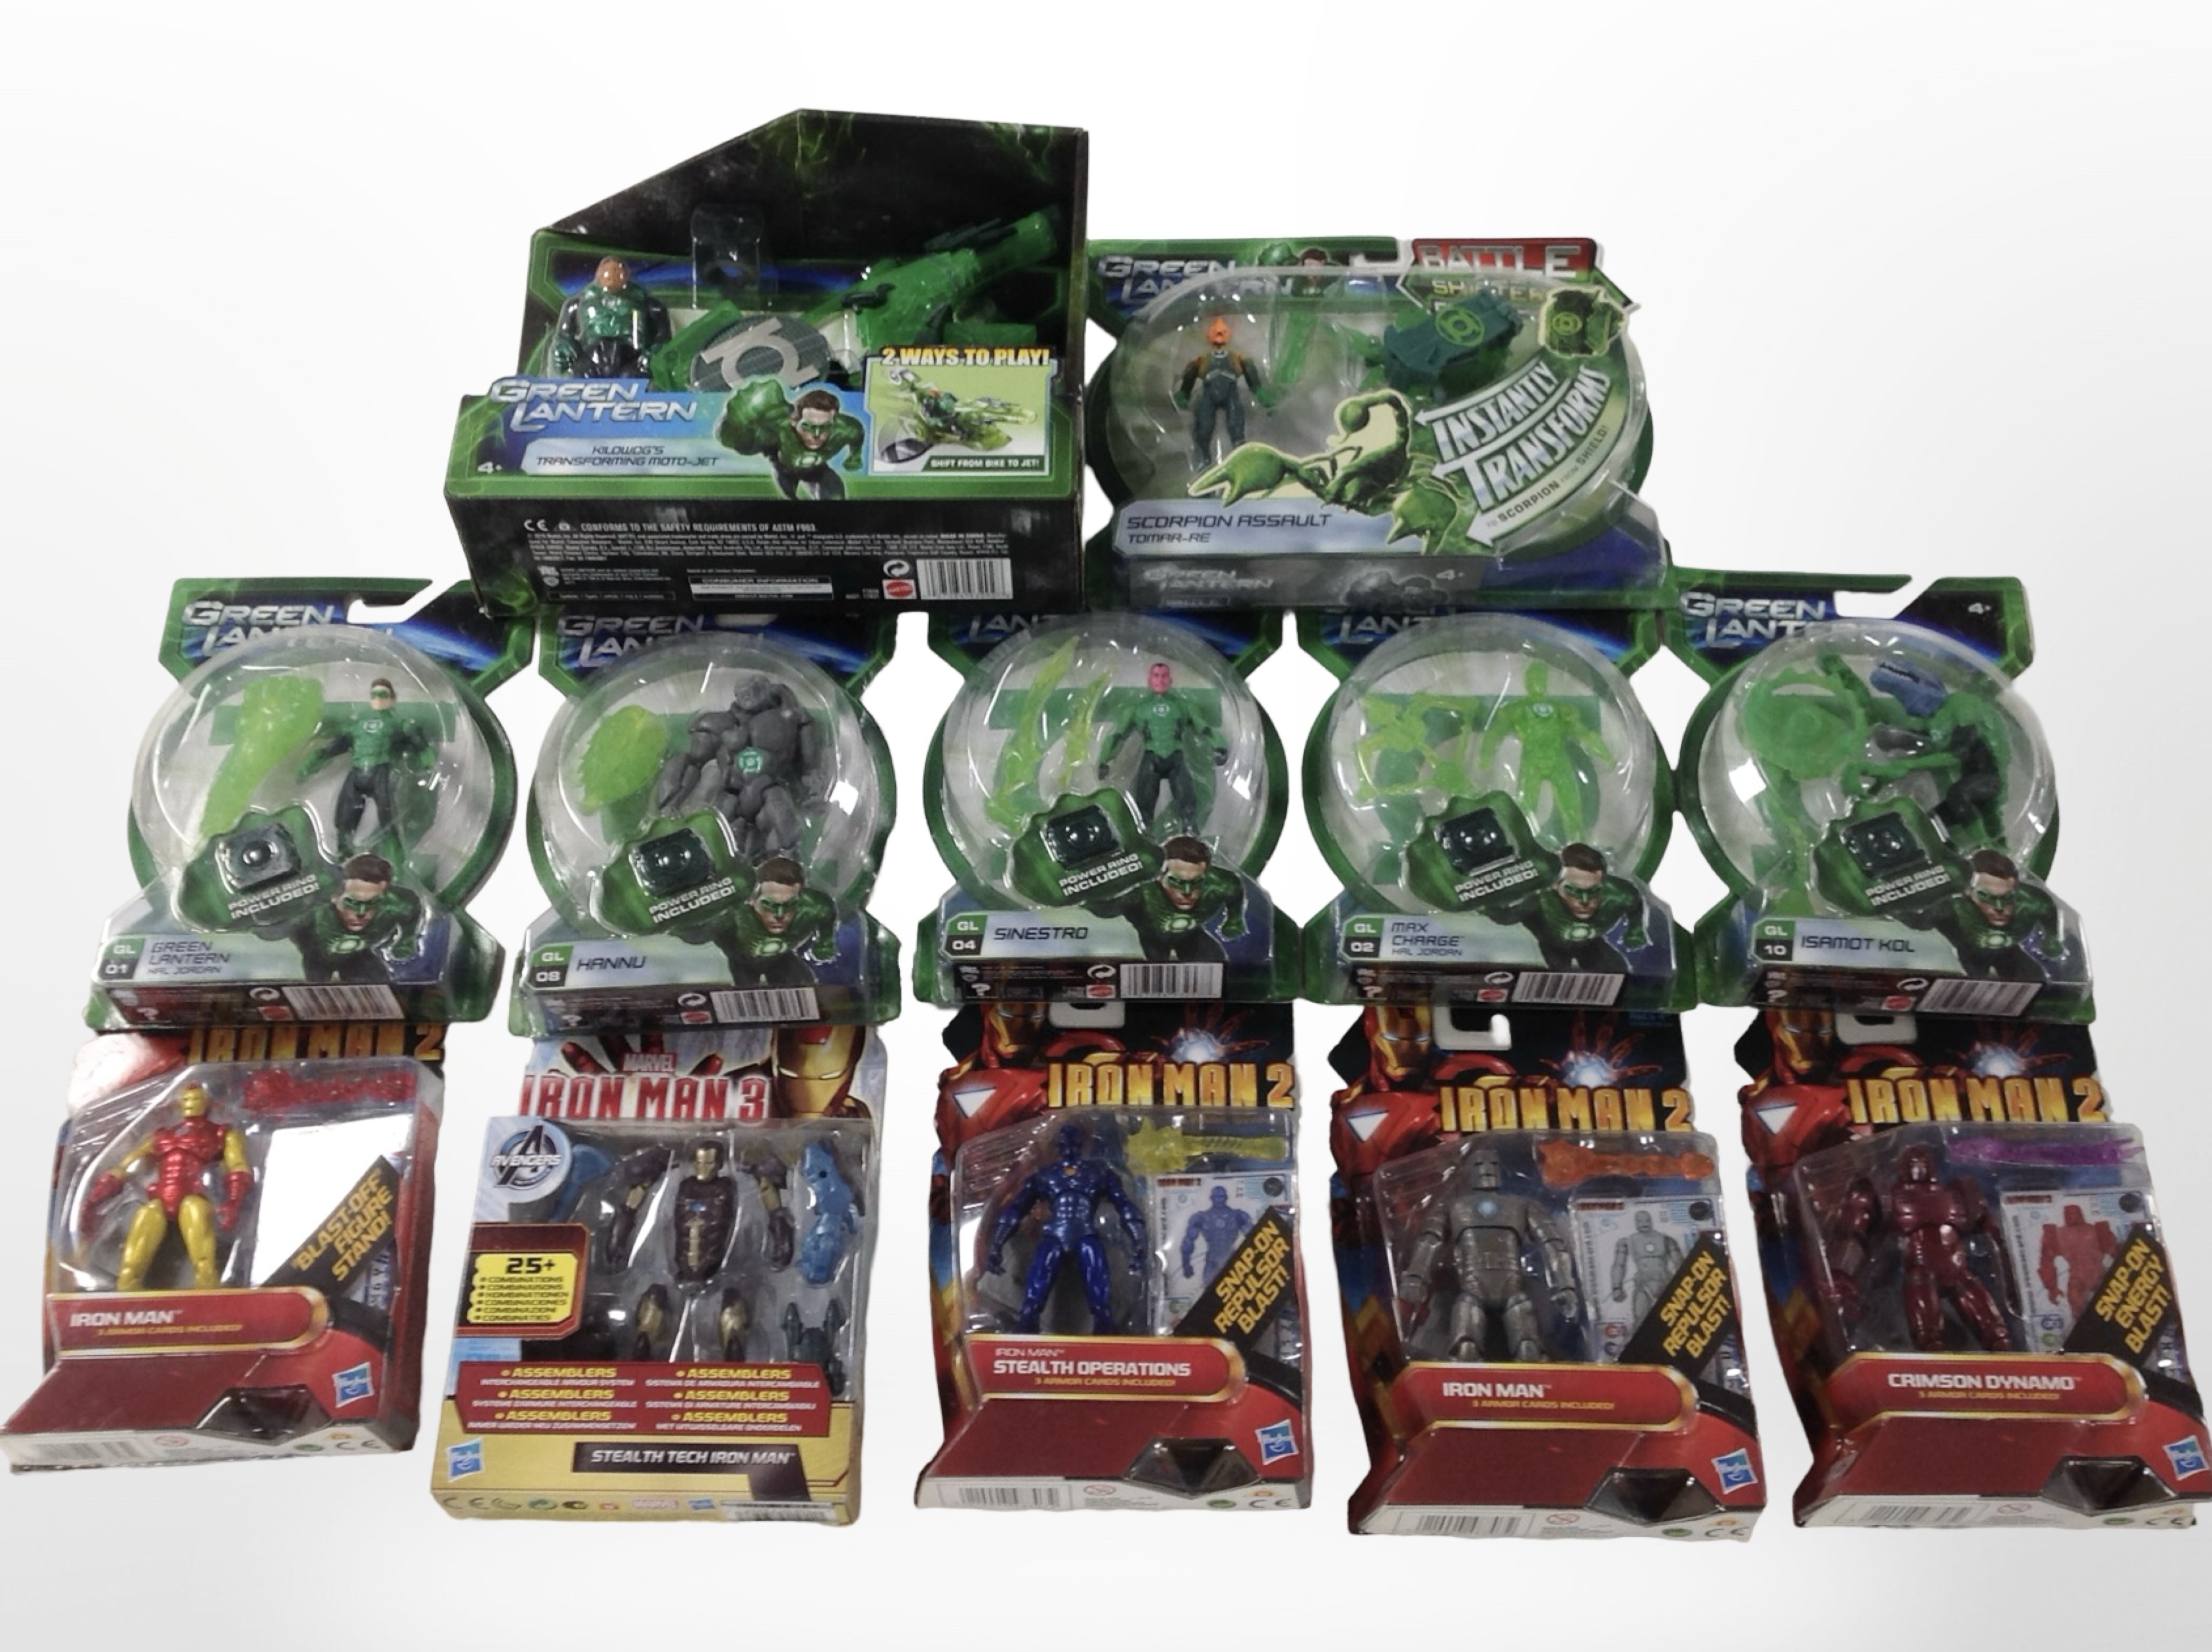 12 Hasbro and Mattel figurines to include Iron Man and Green Lantern, boxed.